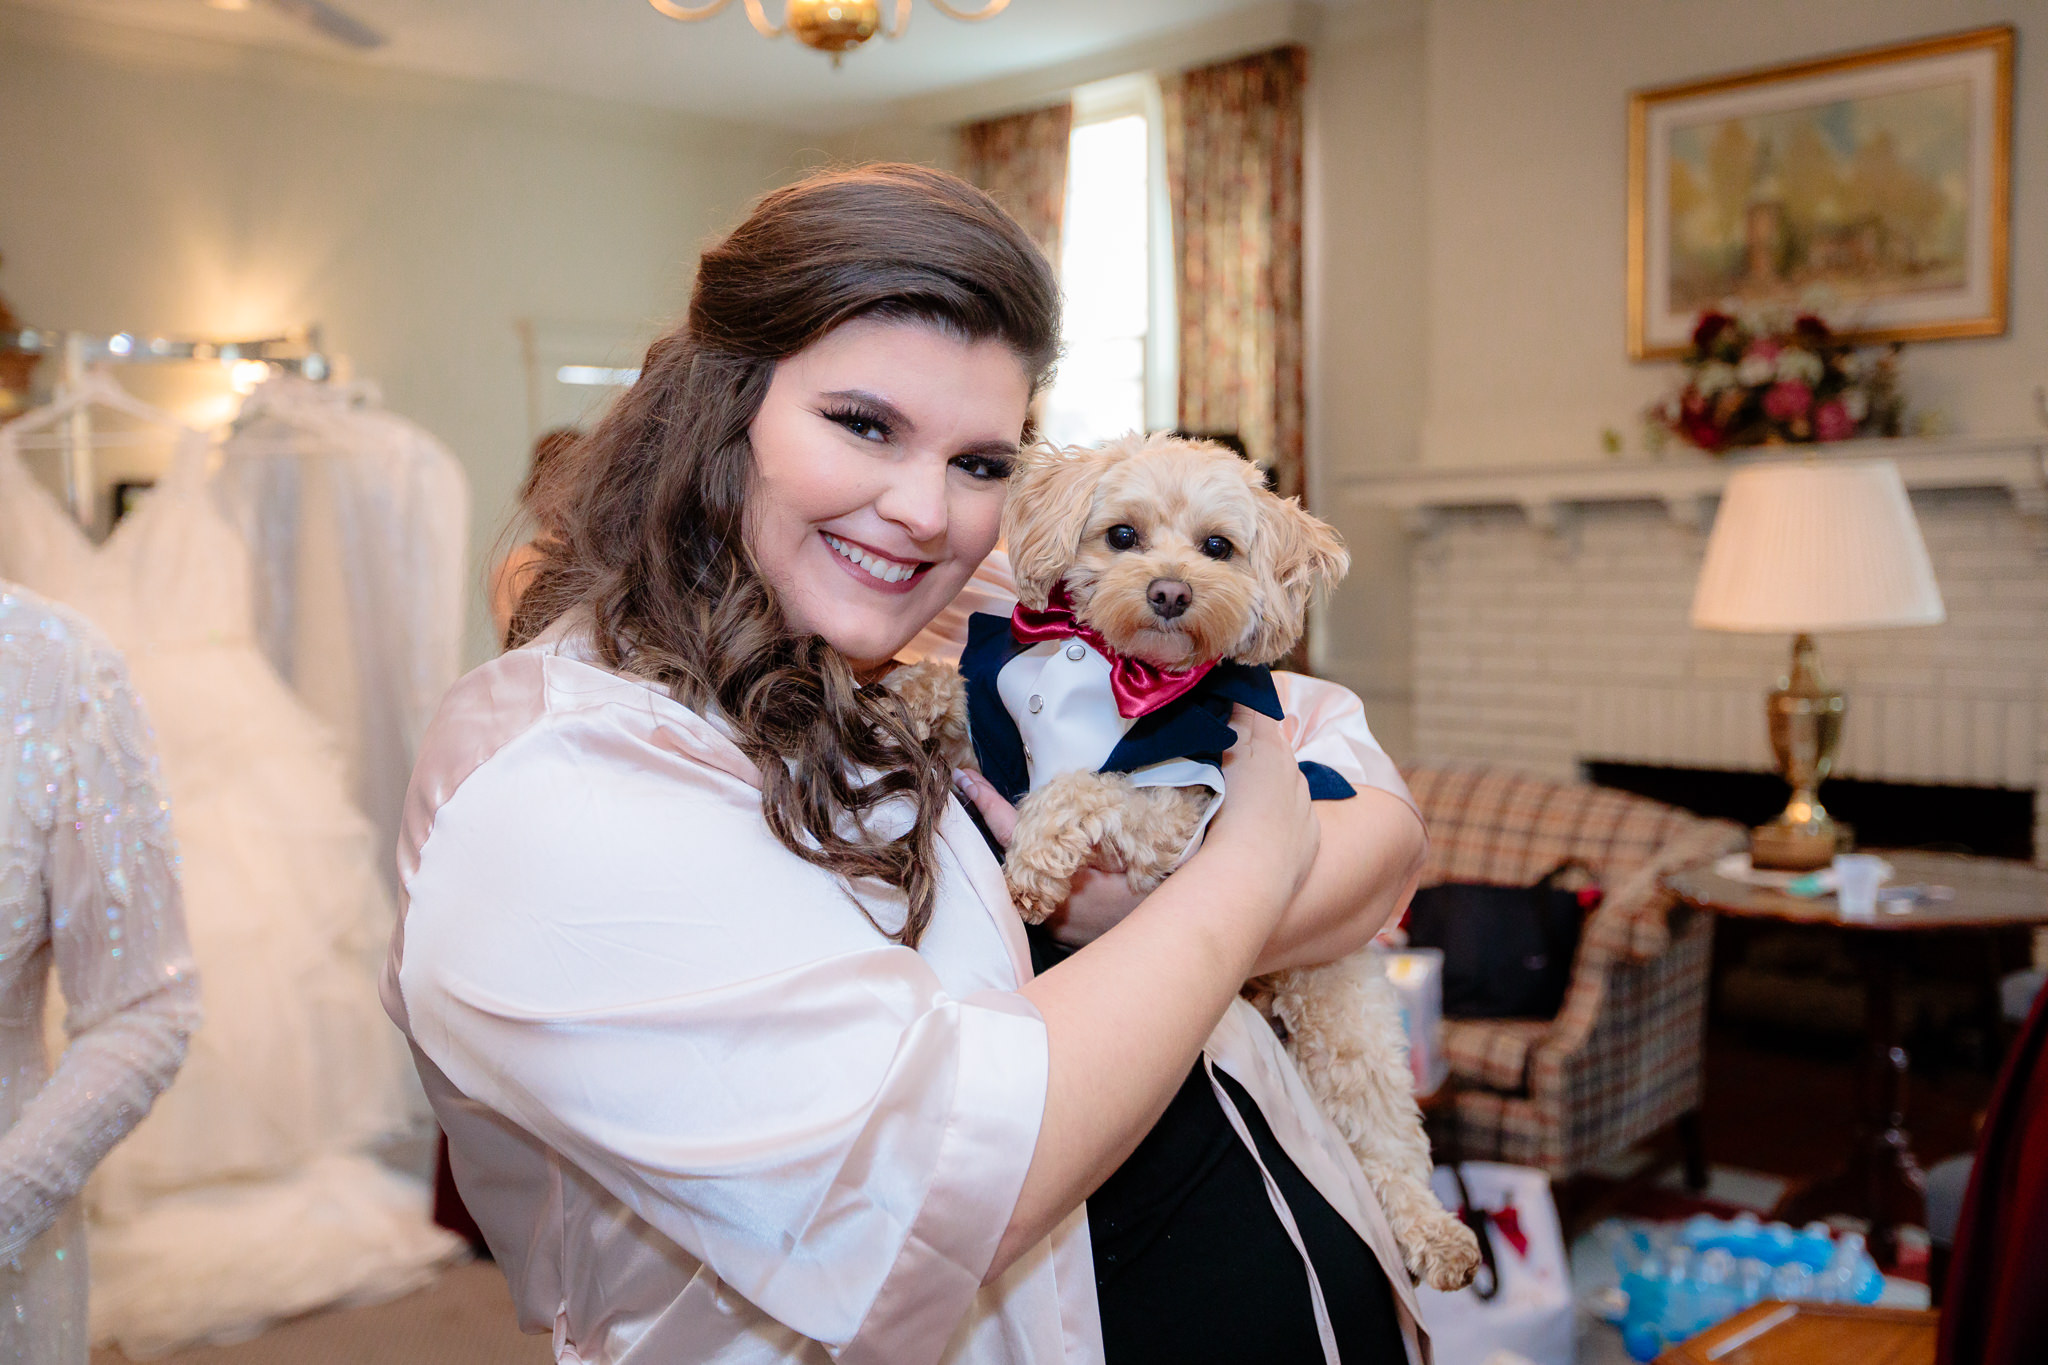 The bride and her dog while getting ready for her wedding at the Pennsylvanian